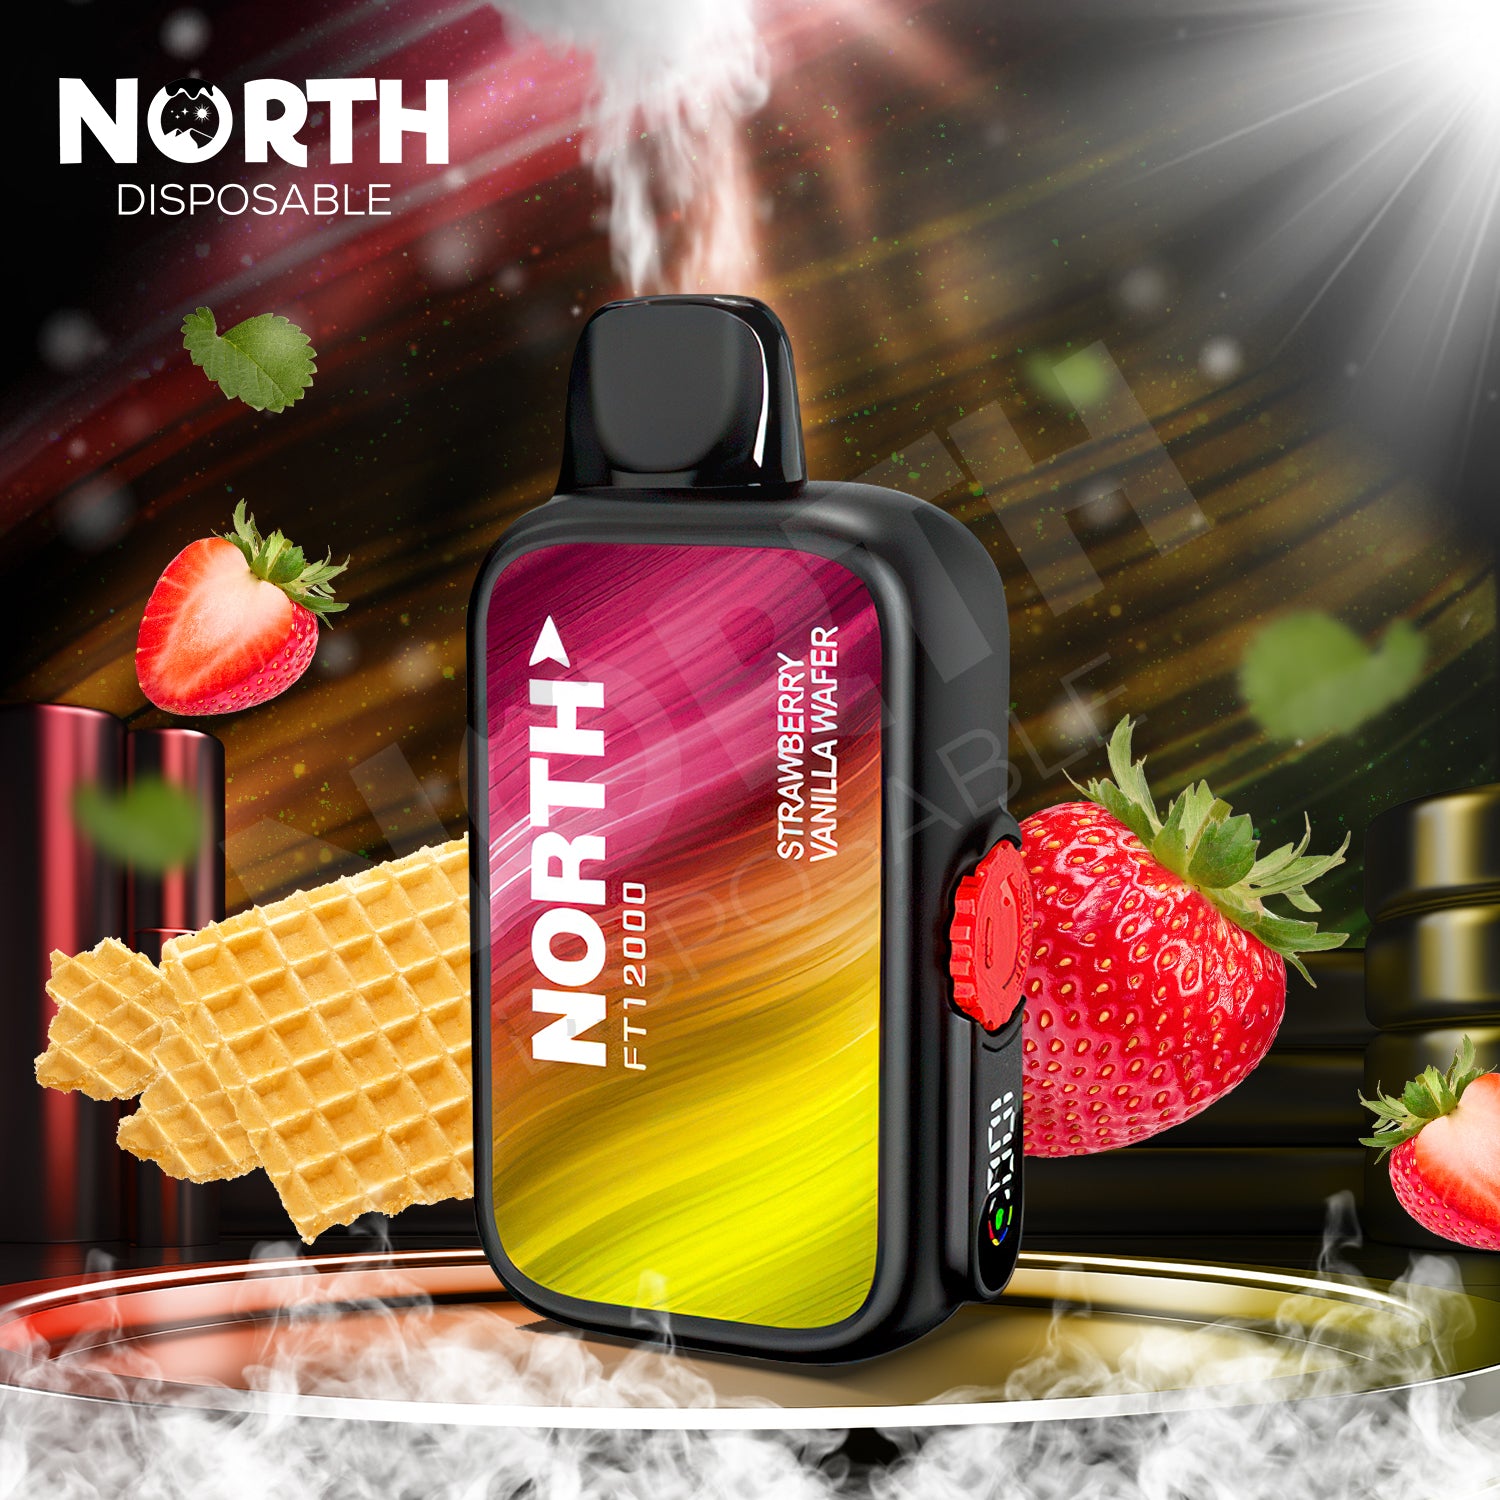 North FT12000 15ML 12000 Puffs Disposable - Strawberry Vanilla Wafer